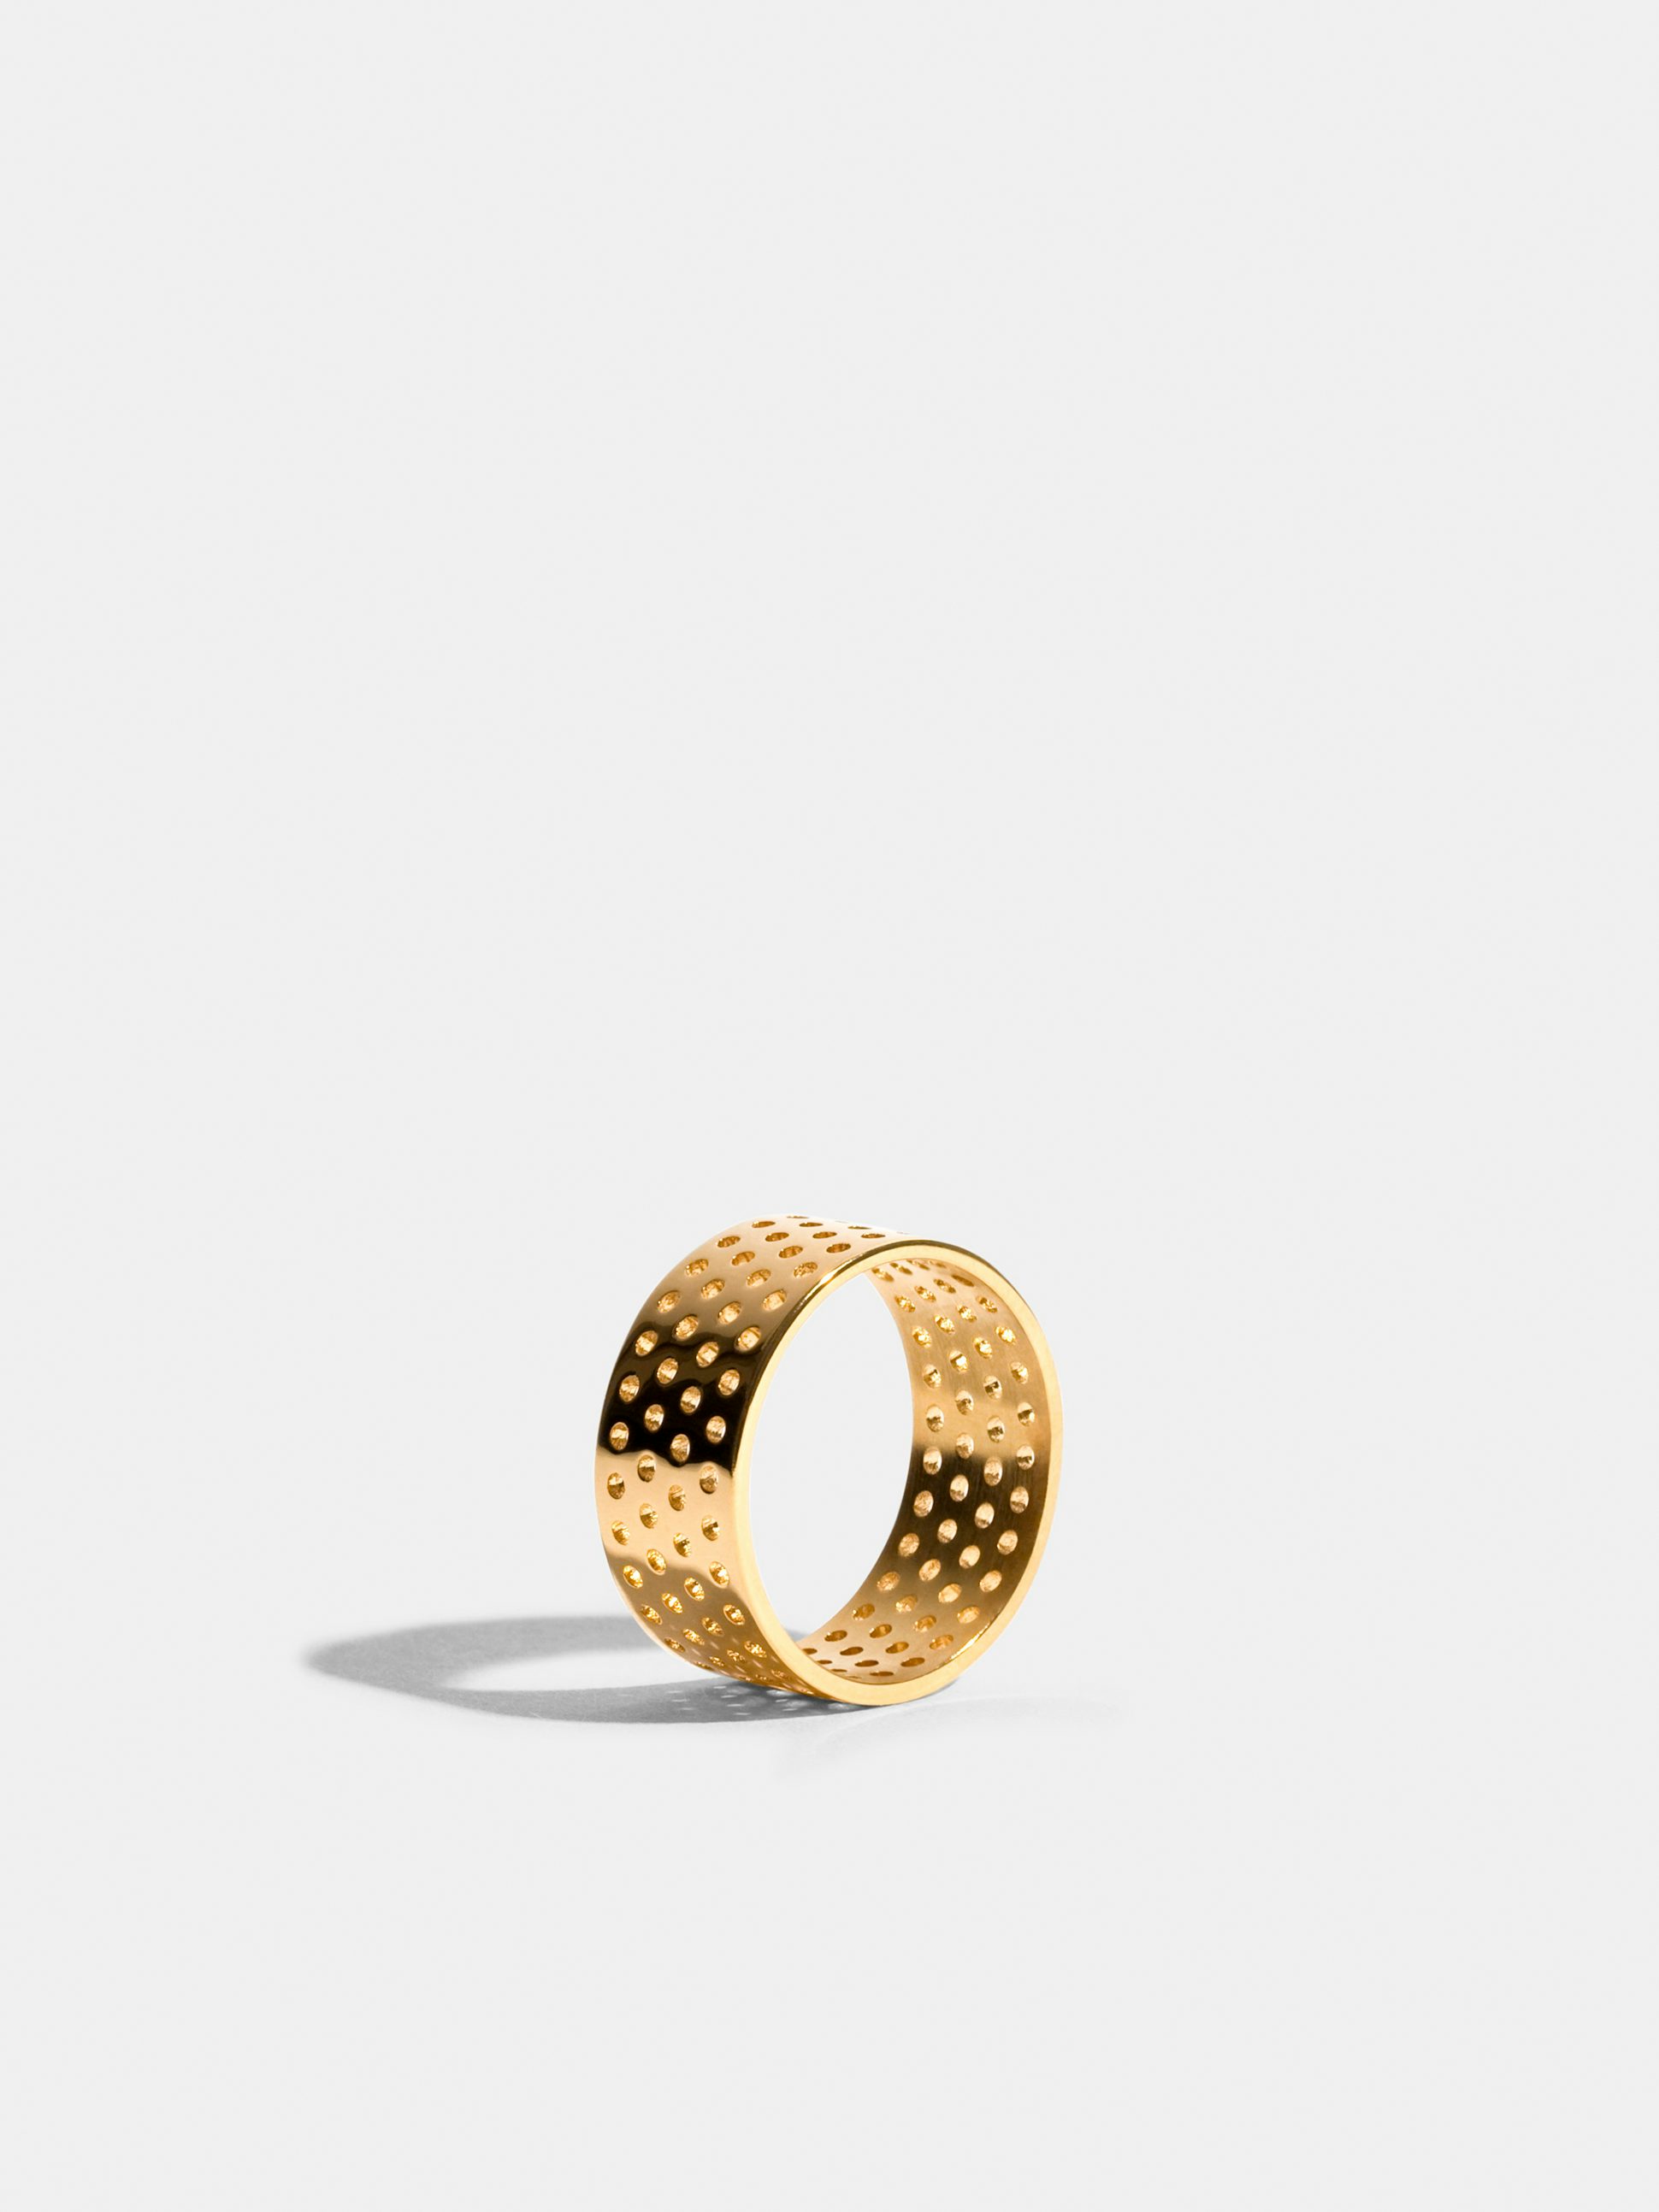 Voids, JEM by India Mahdavi, ring VIII in 18k Fairmined ethical yellow gold (4 rows, fine perforations)